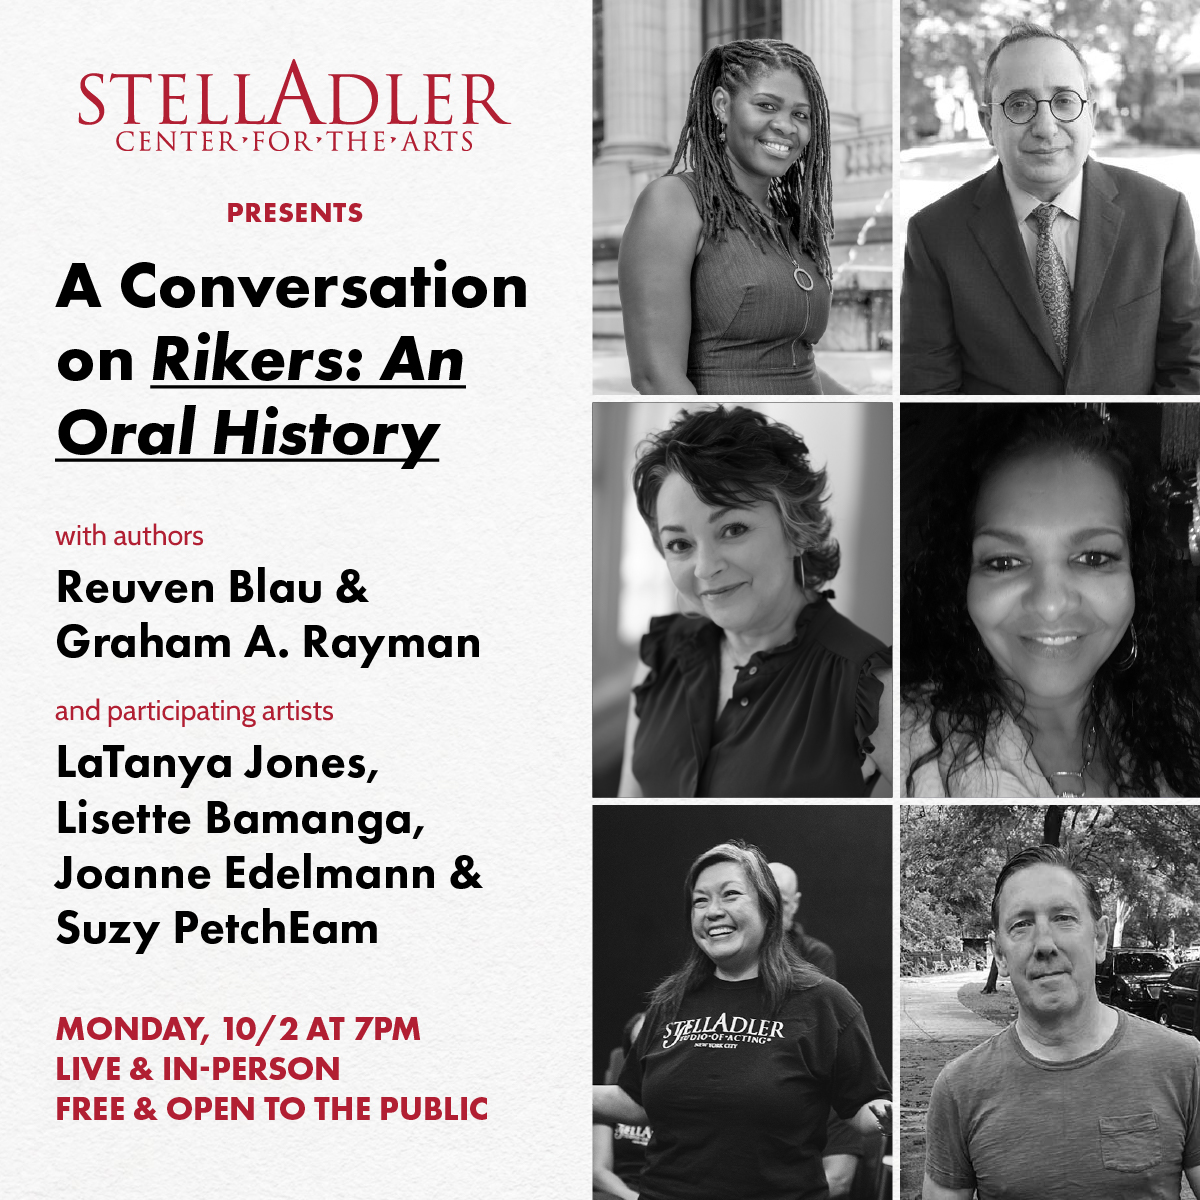 TONIGHT! A Conversation on Rikers: An Oral History at 7pm. Free + open to the public. The authors will talk about why they felt the book was necessary; participants will discuss The Stella Adler Arts Justice Division's work on Rikers + more. ci.ovationtix.com/34682/producti…